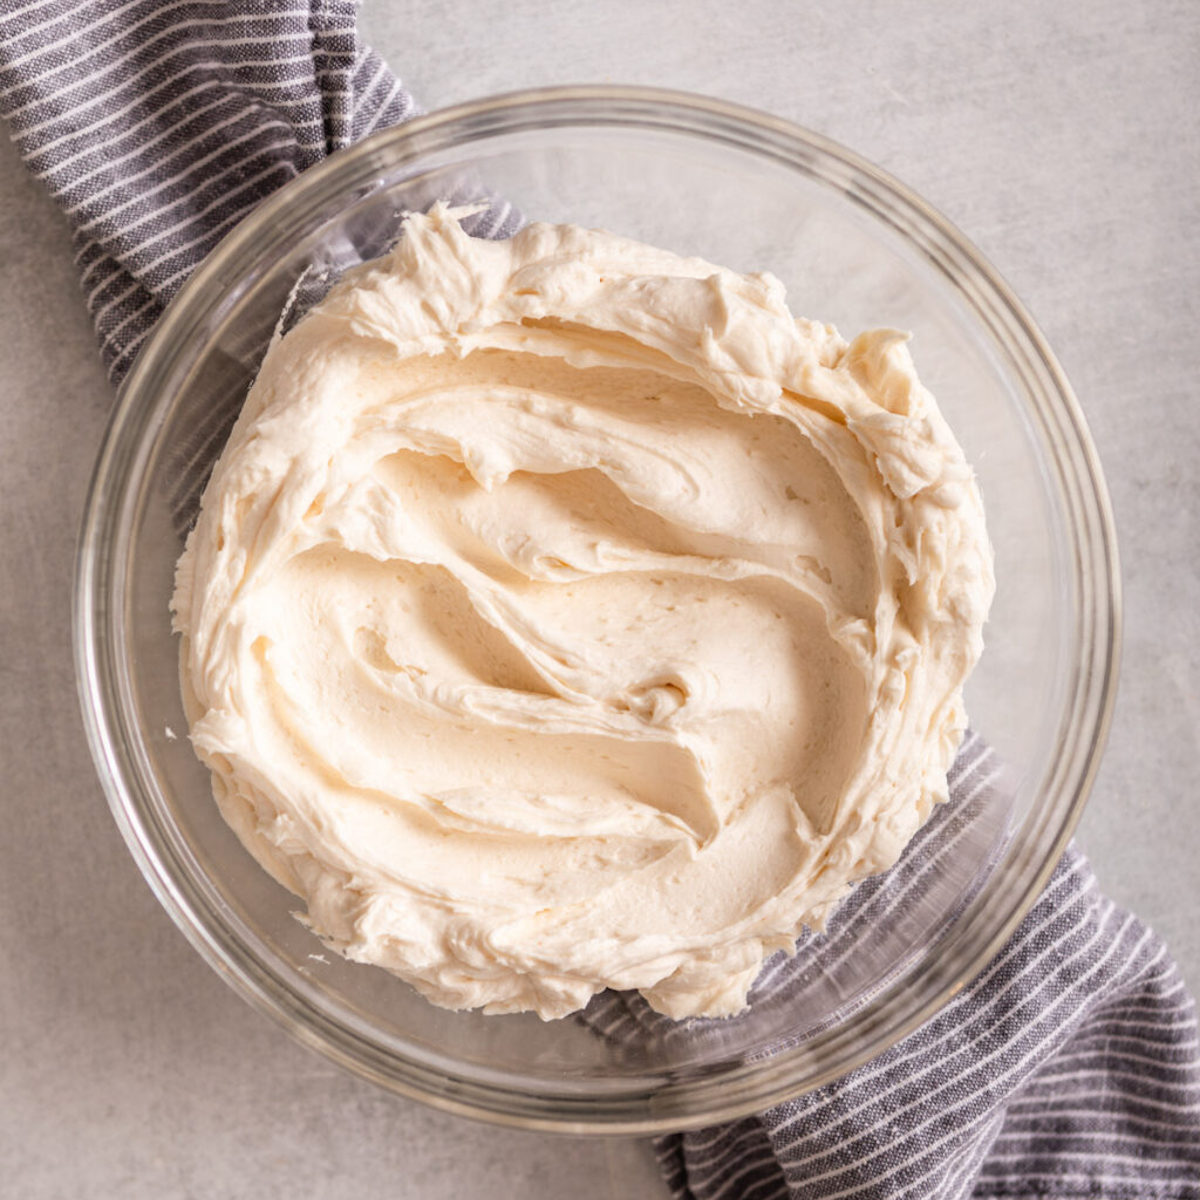 How to Make Buttercream Frosting - Confessions of a Baking Queen